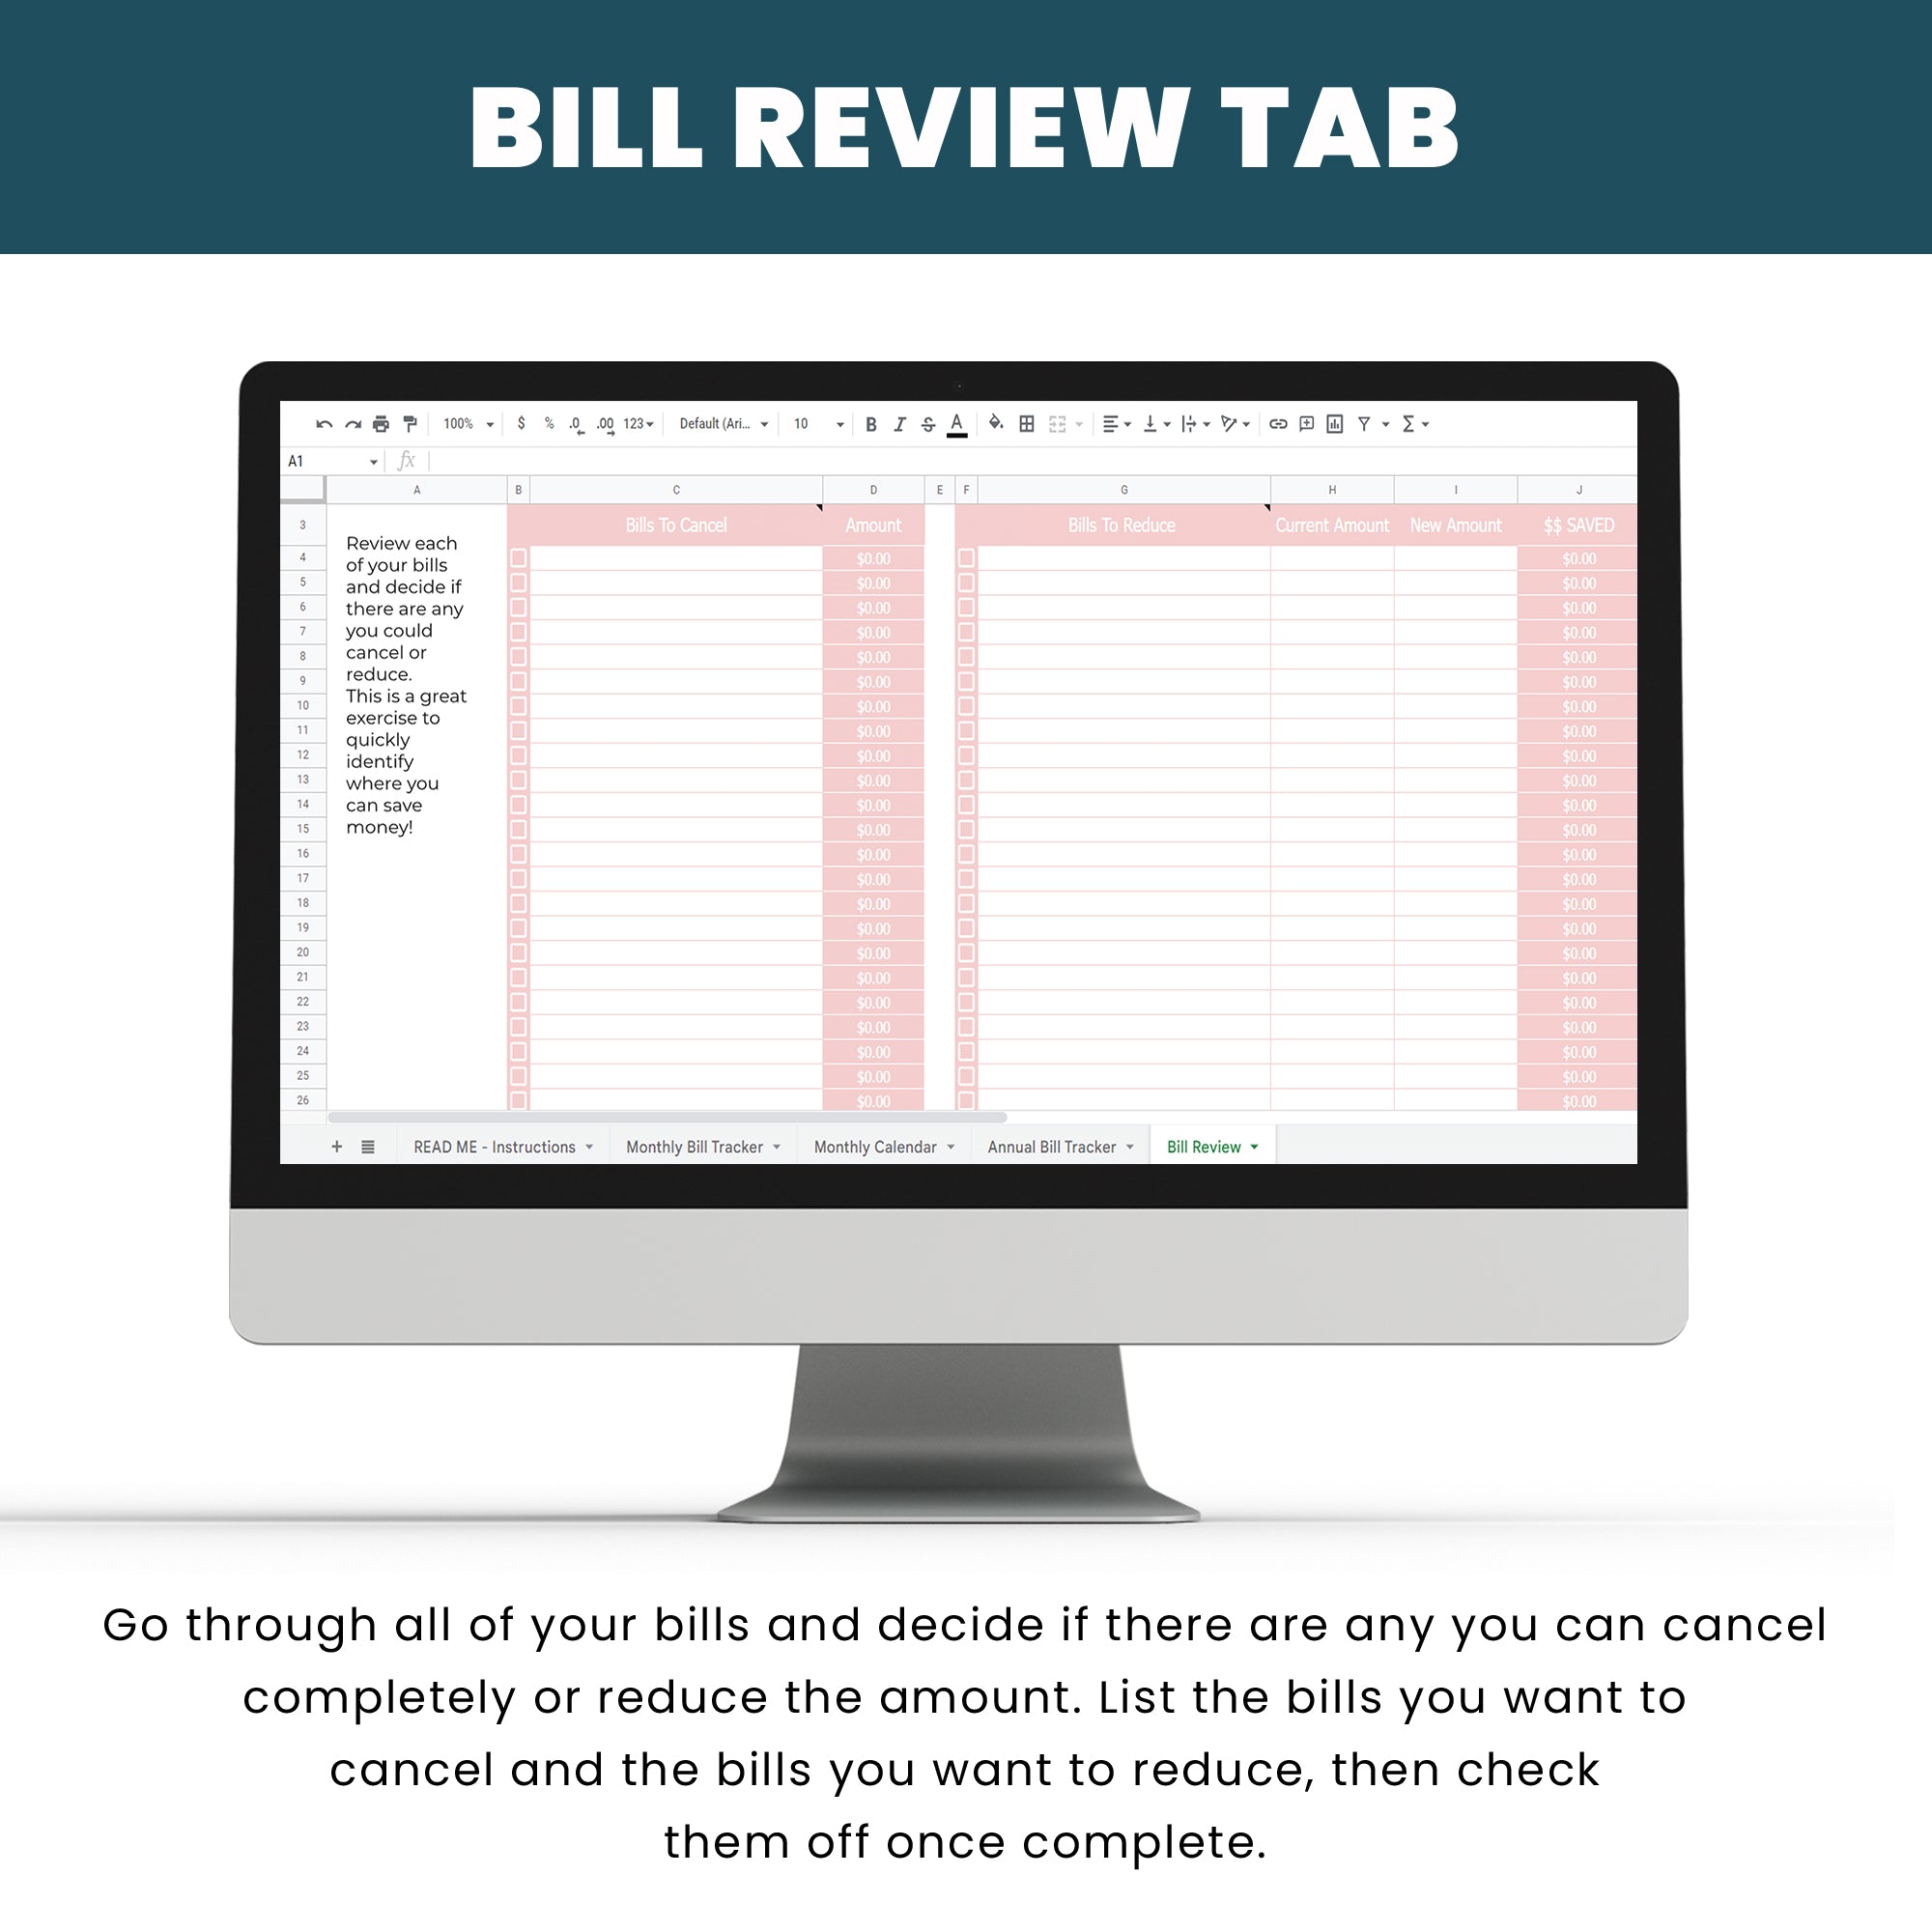 Monthly Bill Tracker Spreadsheet - Keep All Your Bills Organized In A Single Place!